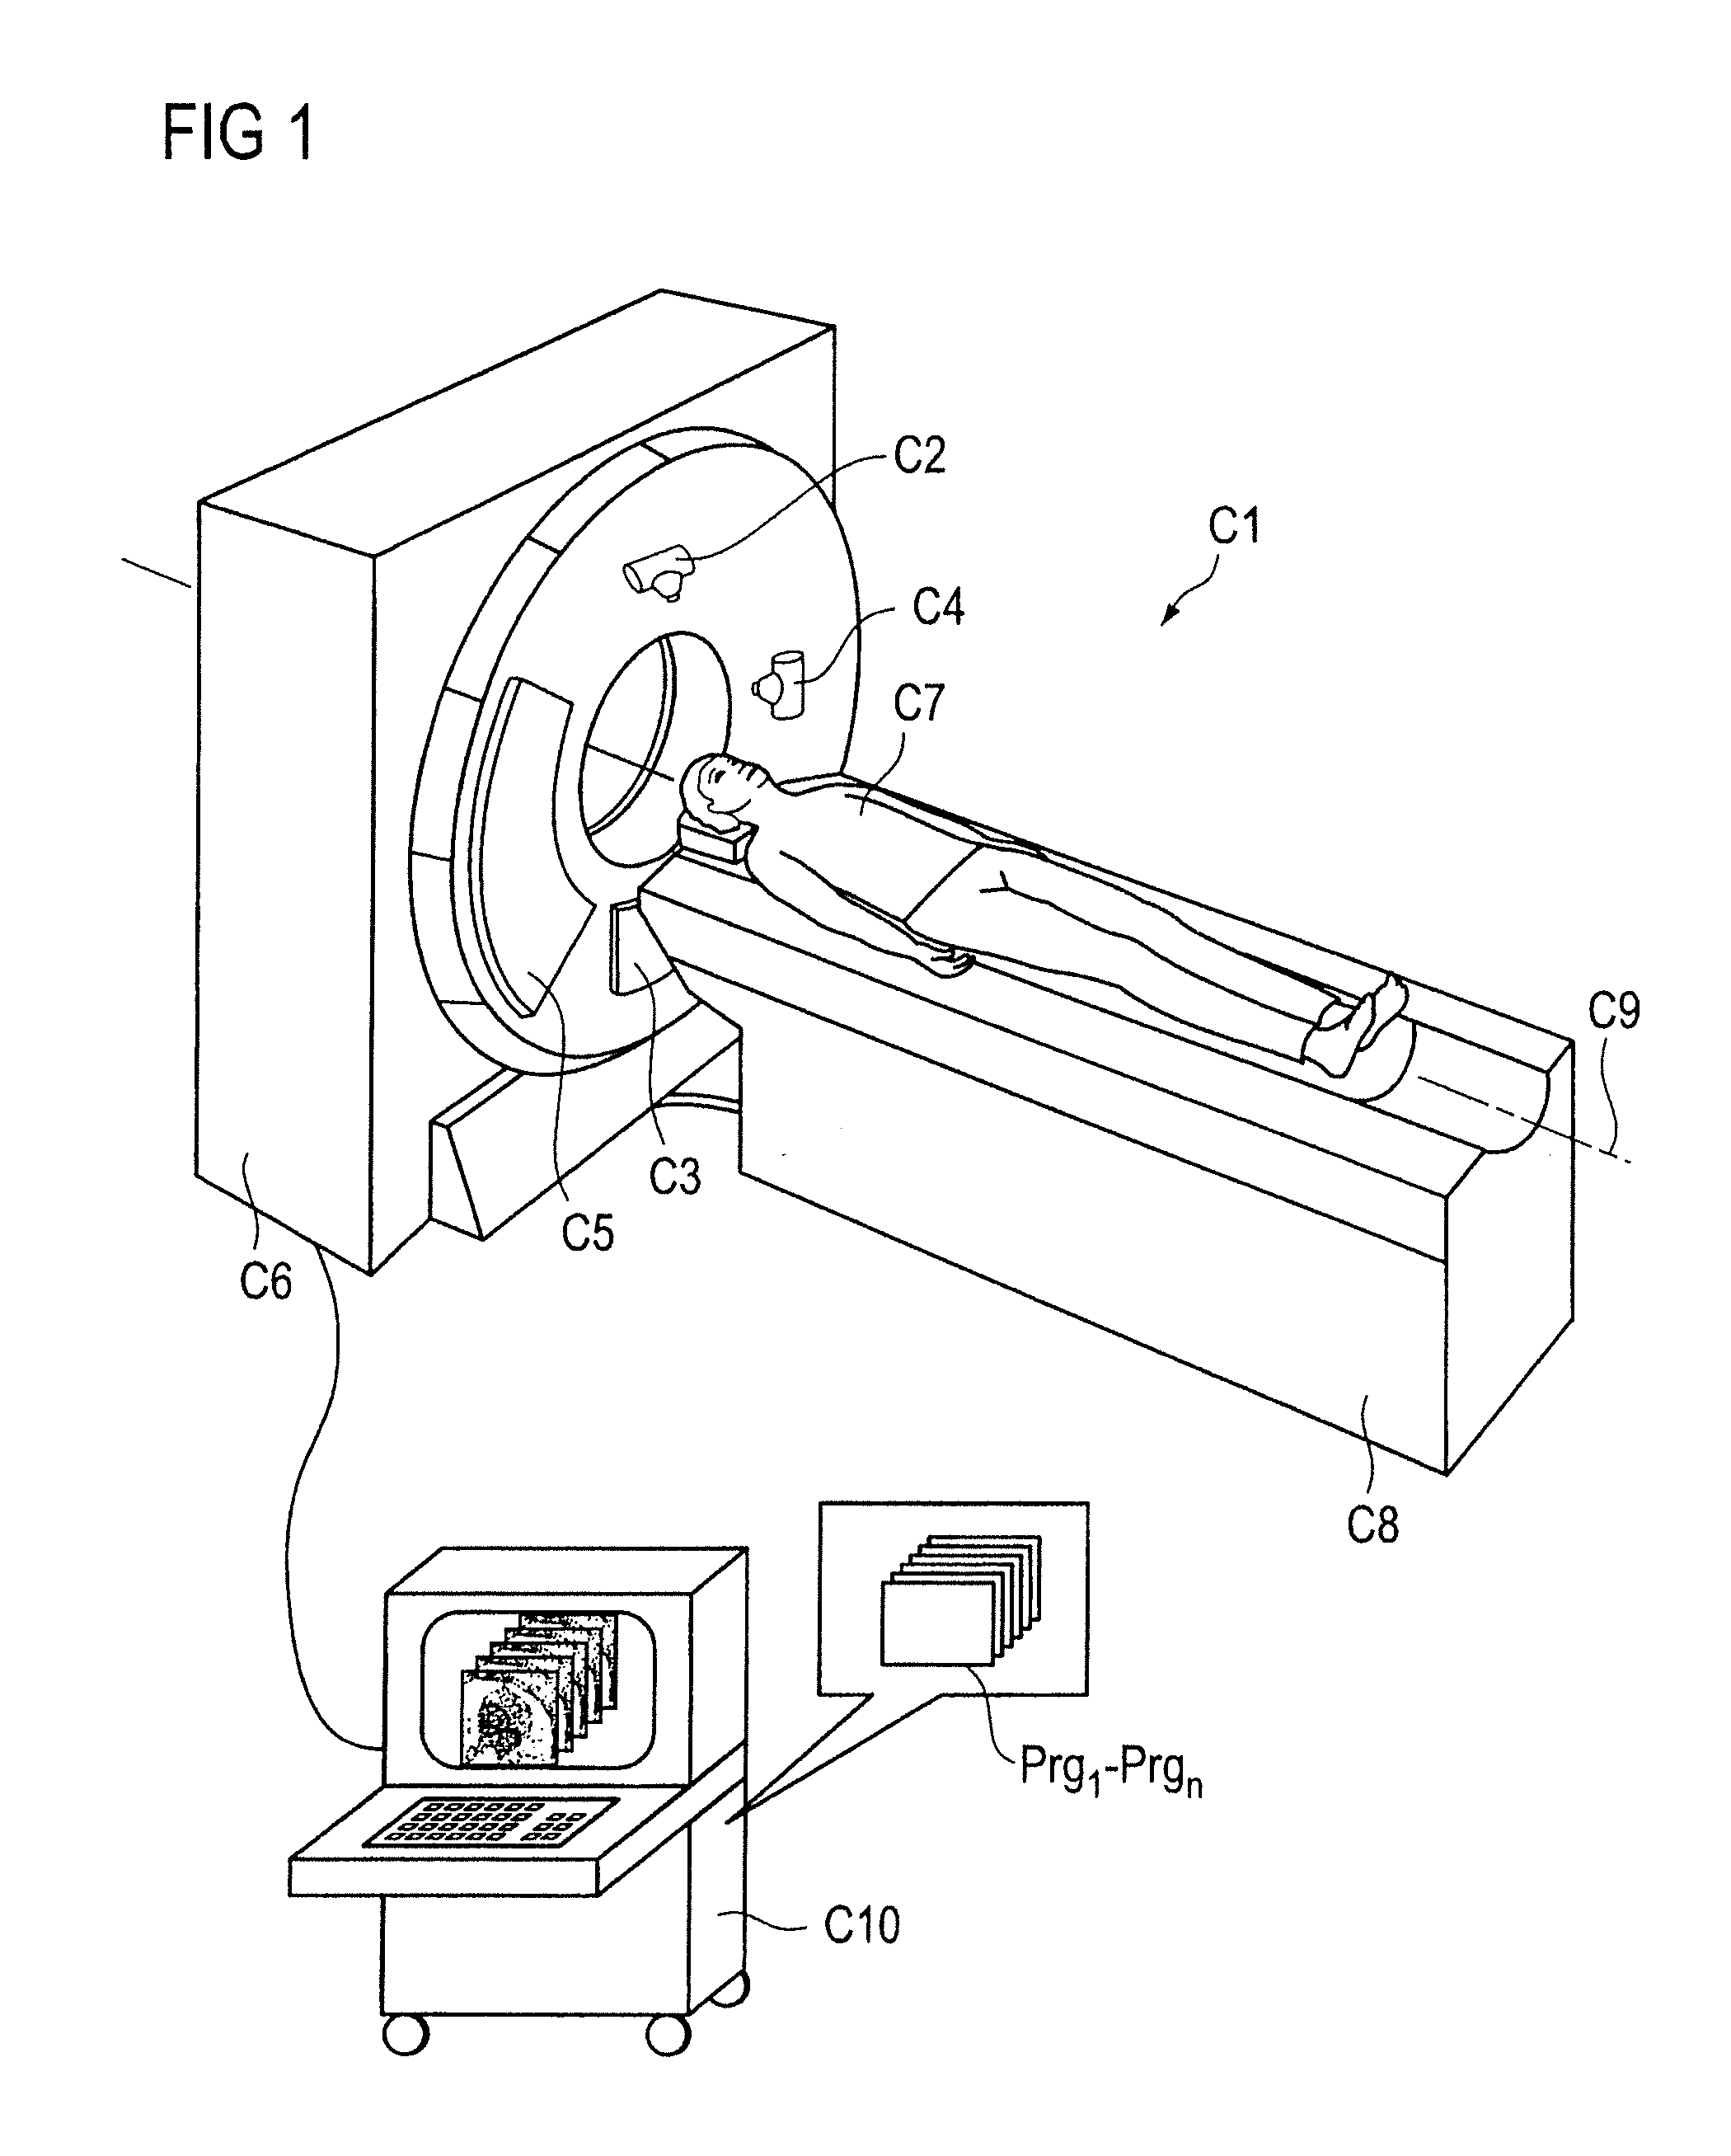 Device to transfer high frequency electrical signals between a rotating component and a stationary component